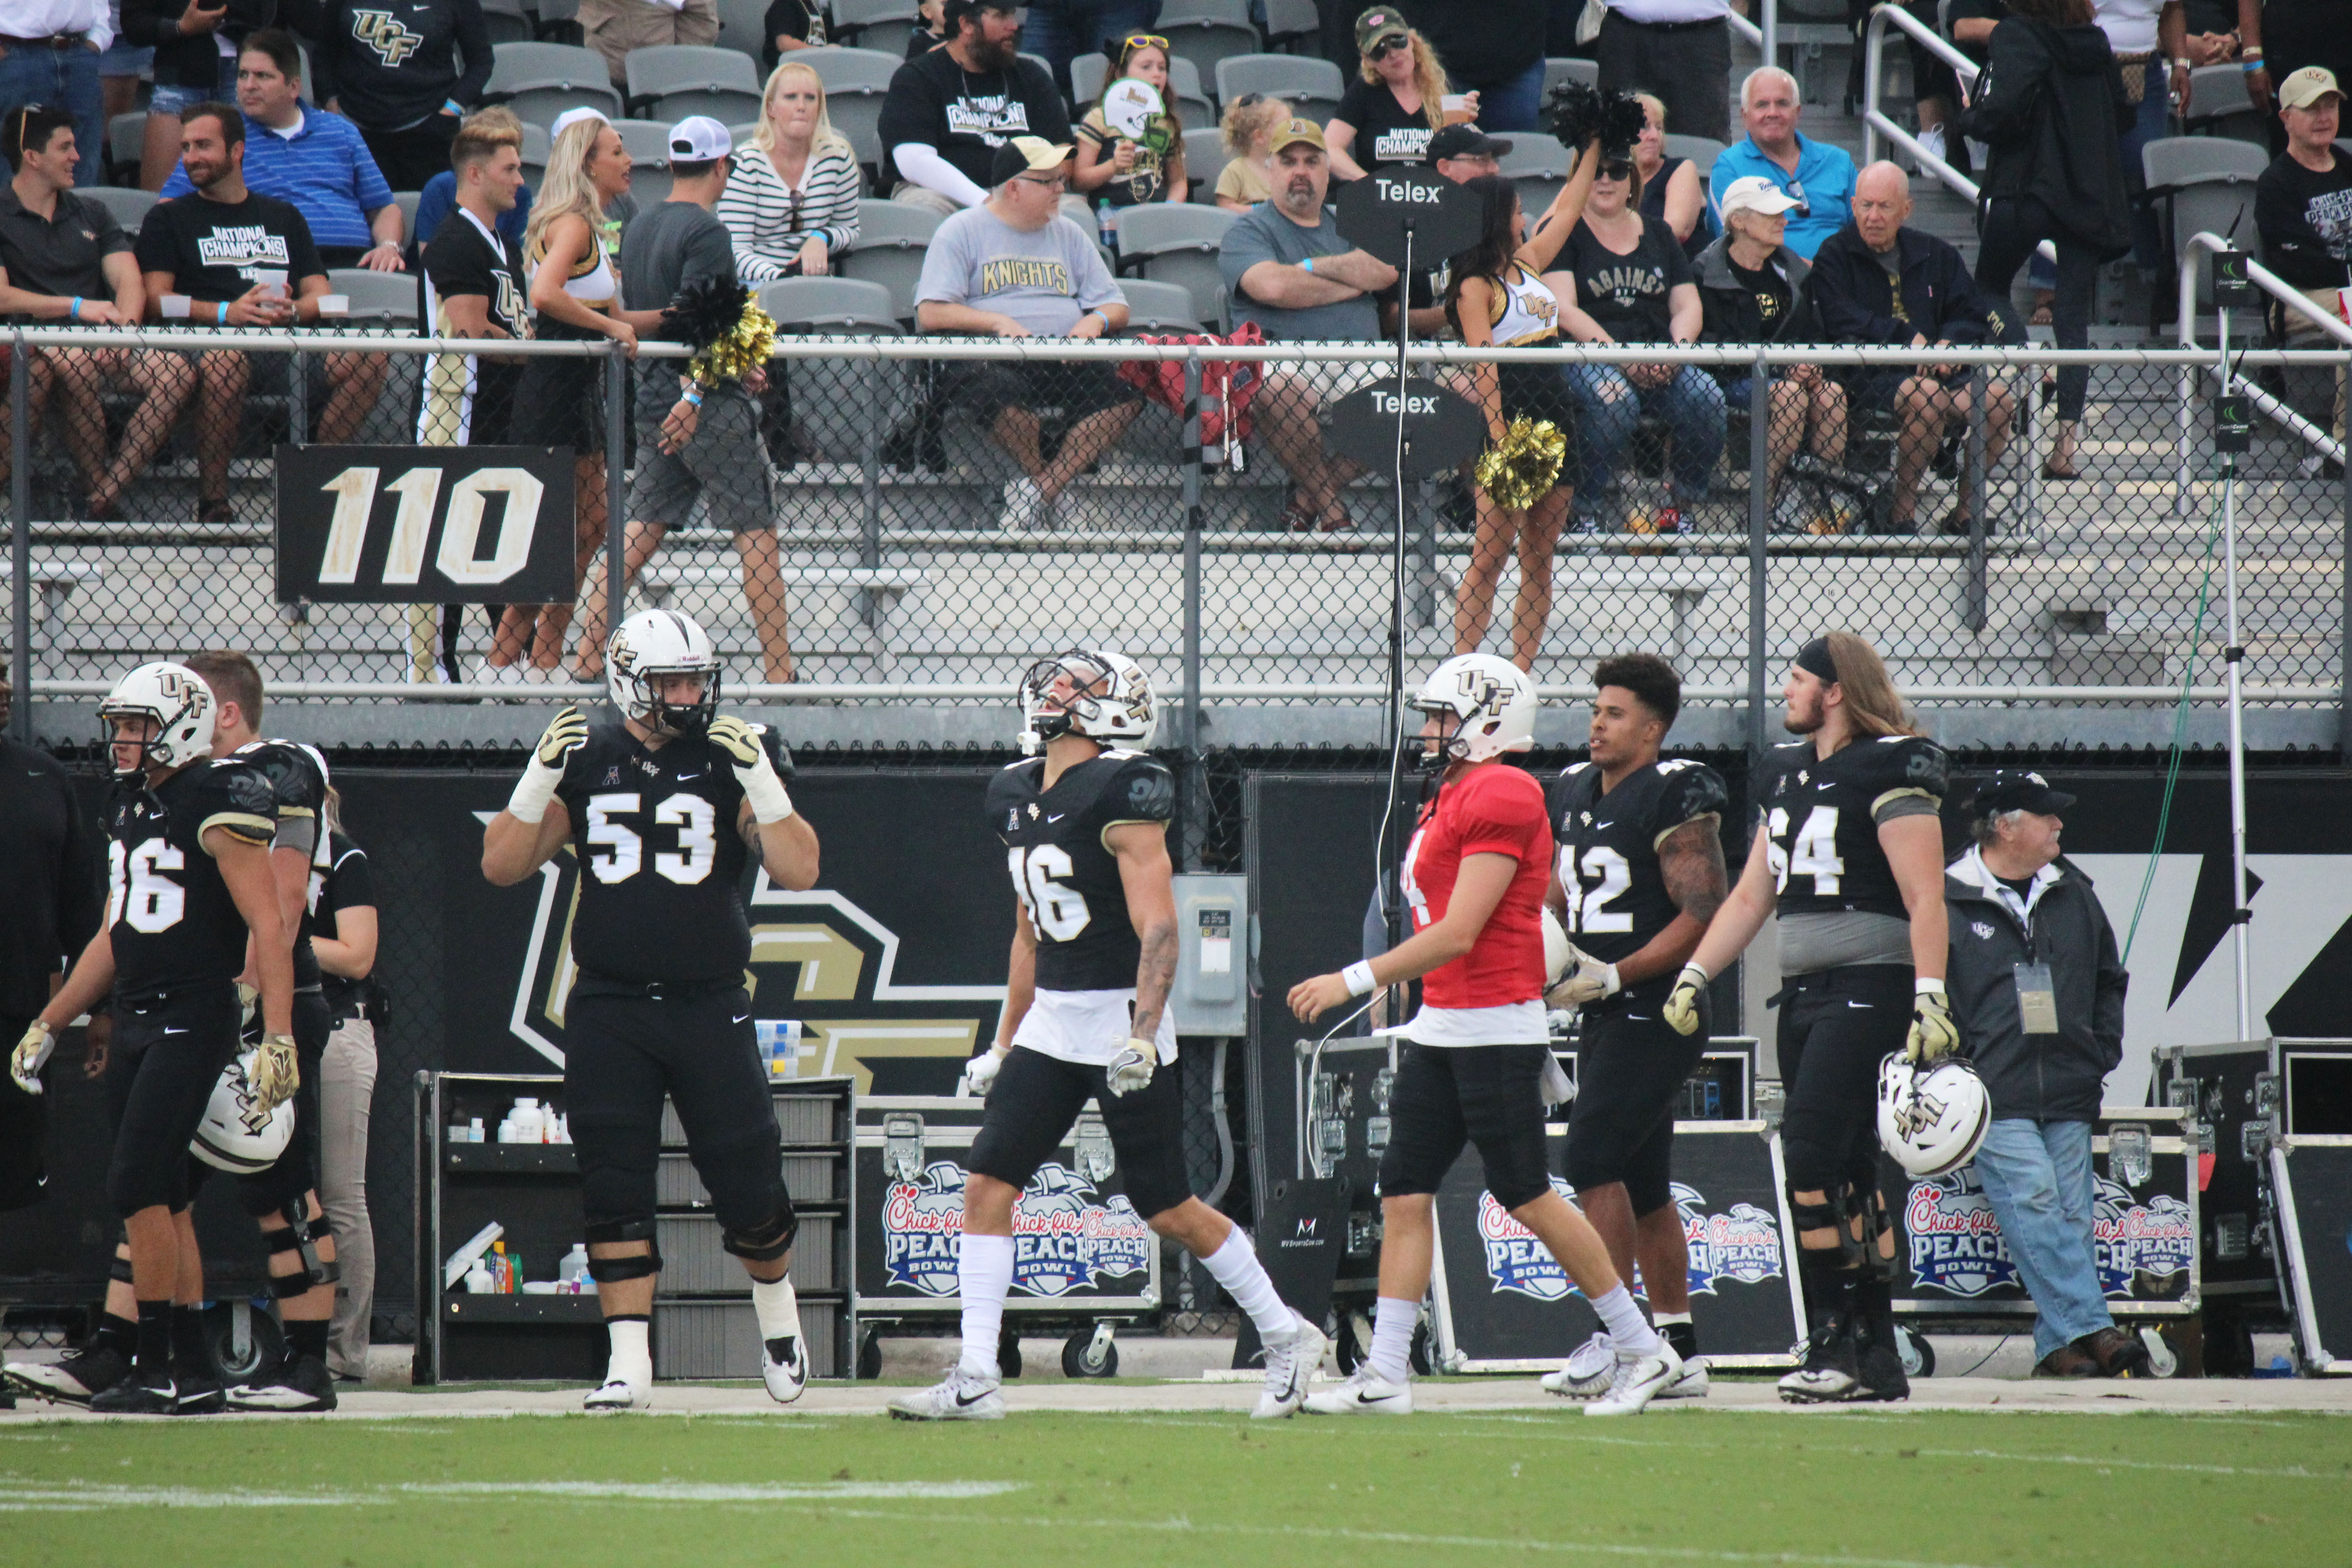 Gallery UCF Football Spring Game – Knight Sports Now >> UCF Knights